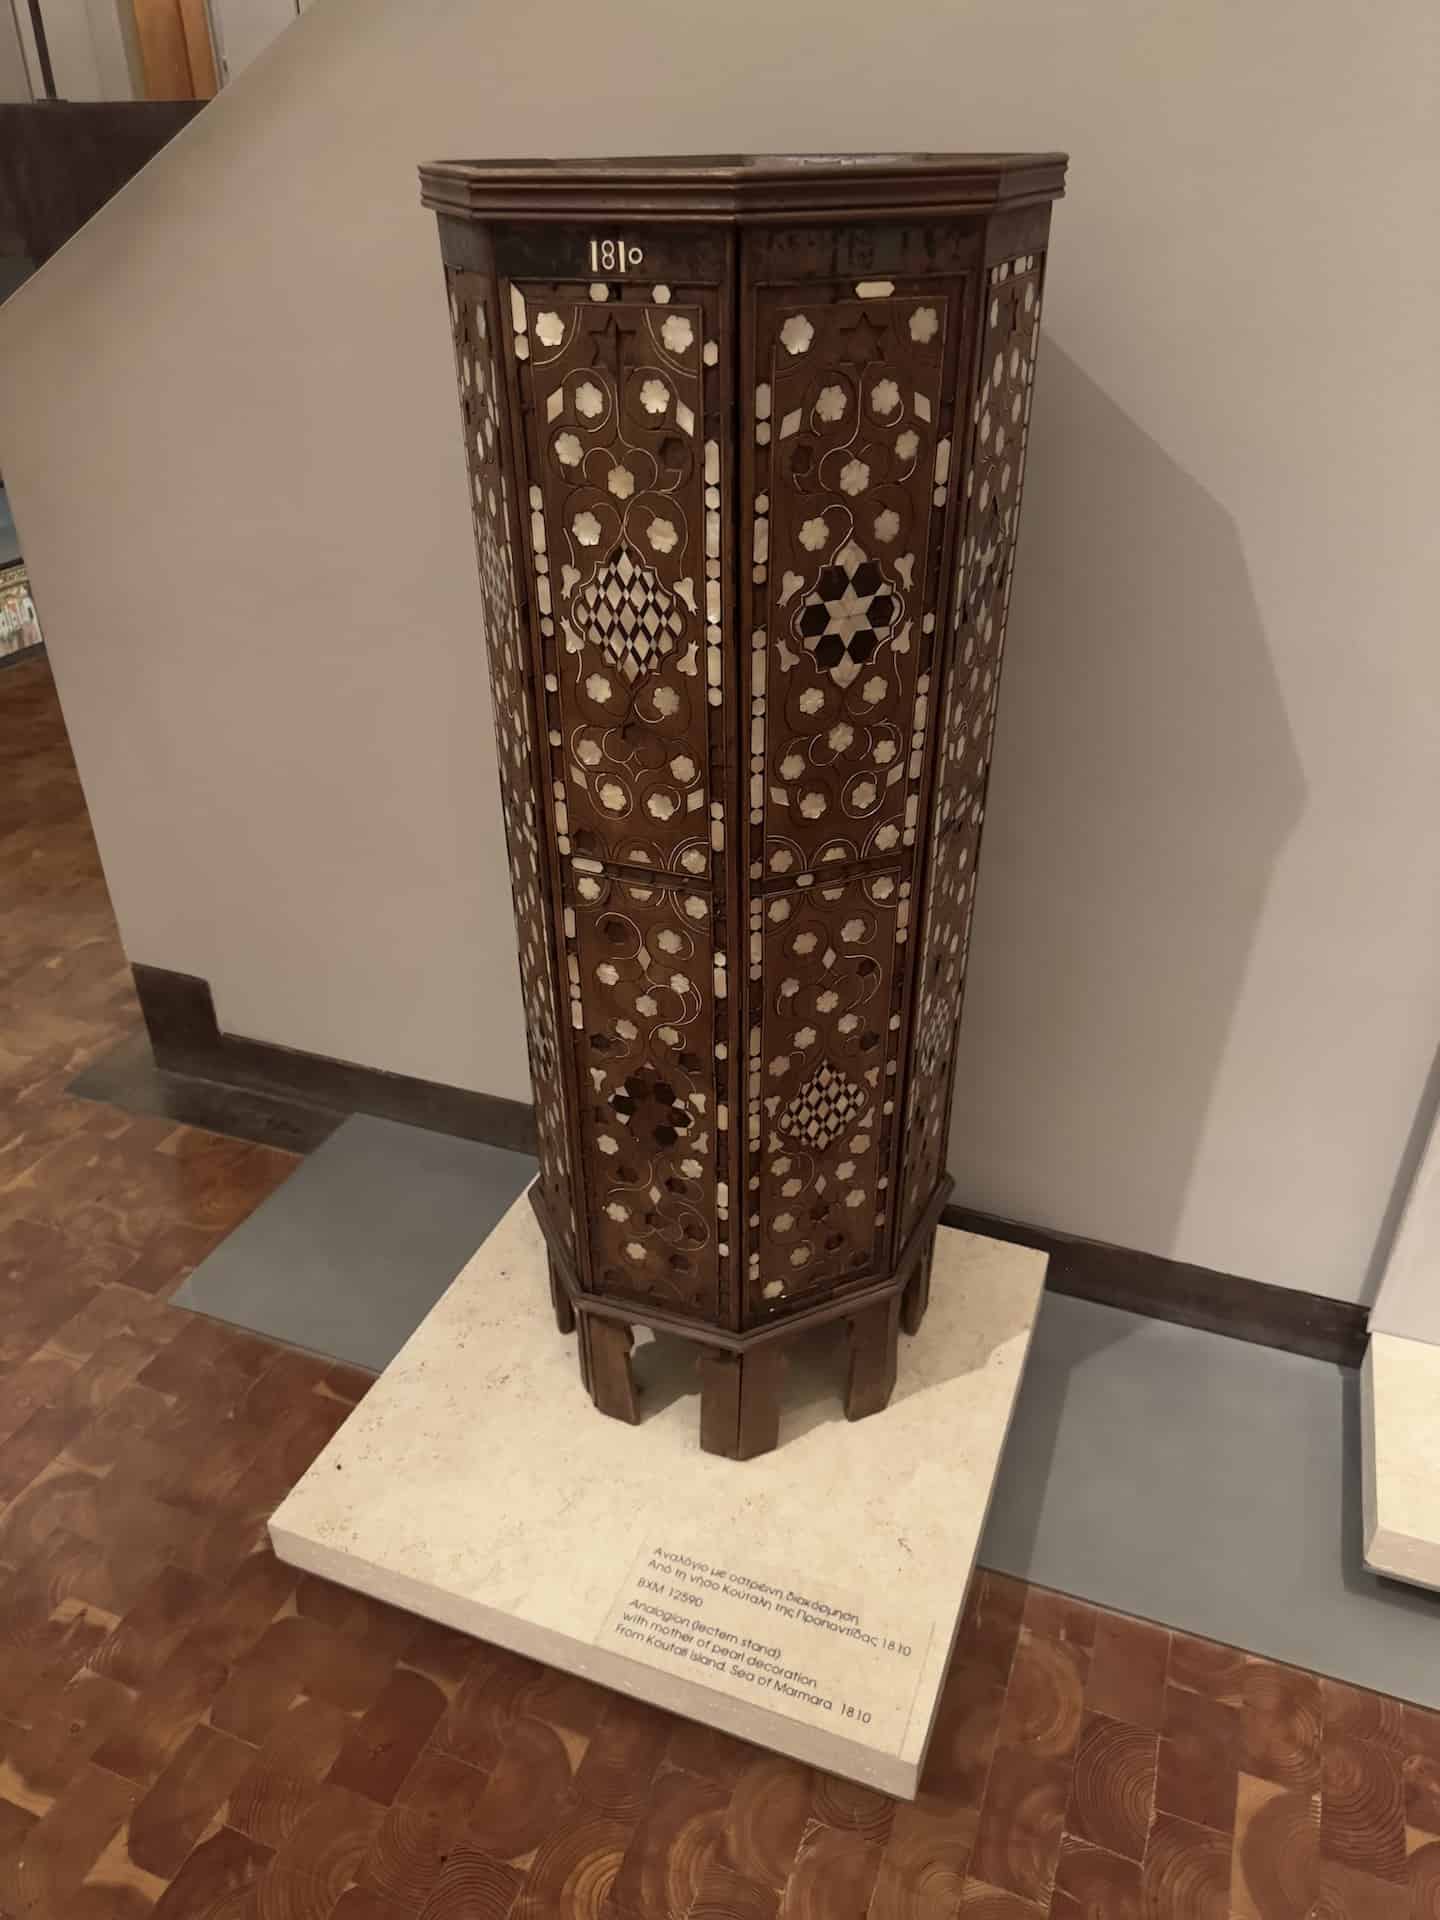 Lectern stand with mother of pearl decoration, from Koutali Island (now Ekinlik), Sea of Marmara, 1810 at the Byzantine Museum in Athens, Greece